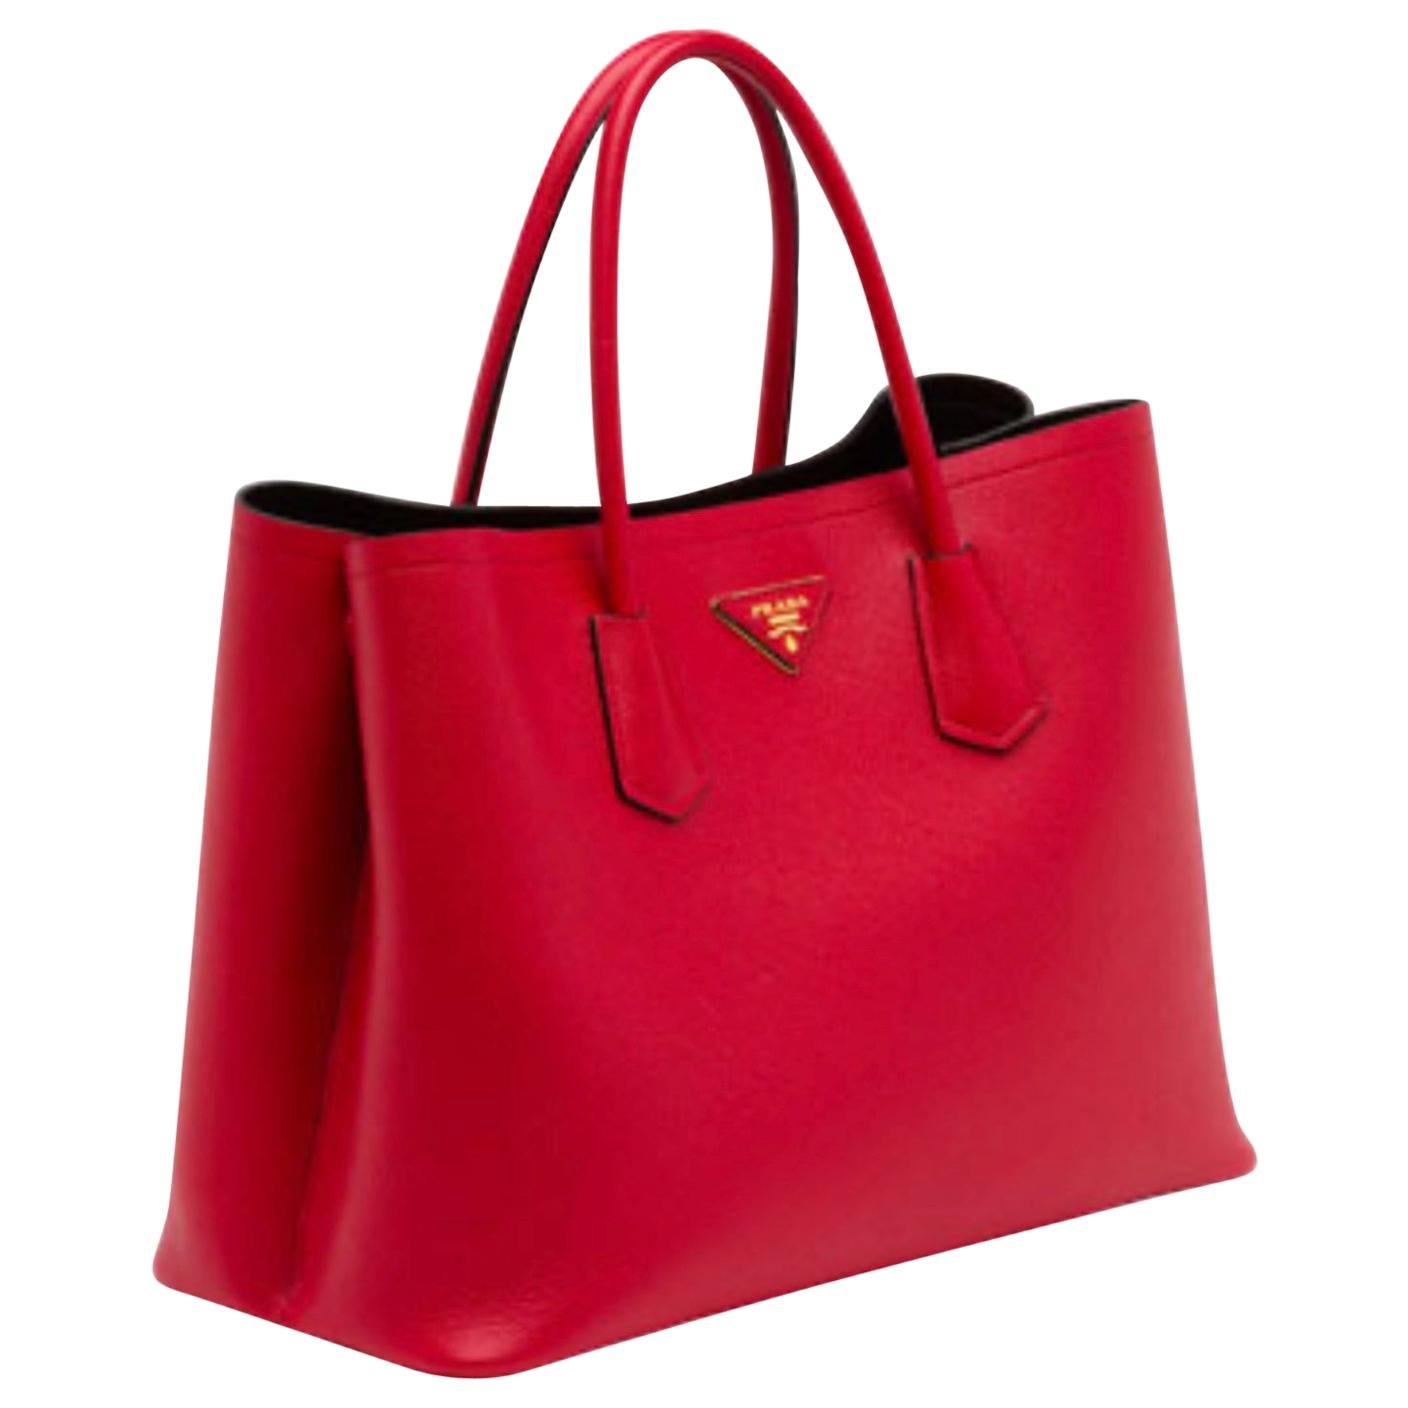 Best Deals for Red Prada Saffiano Cuir Double Bag